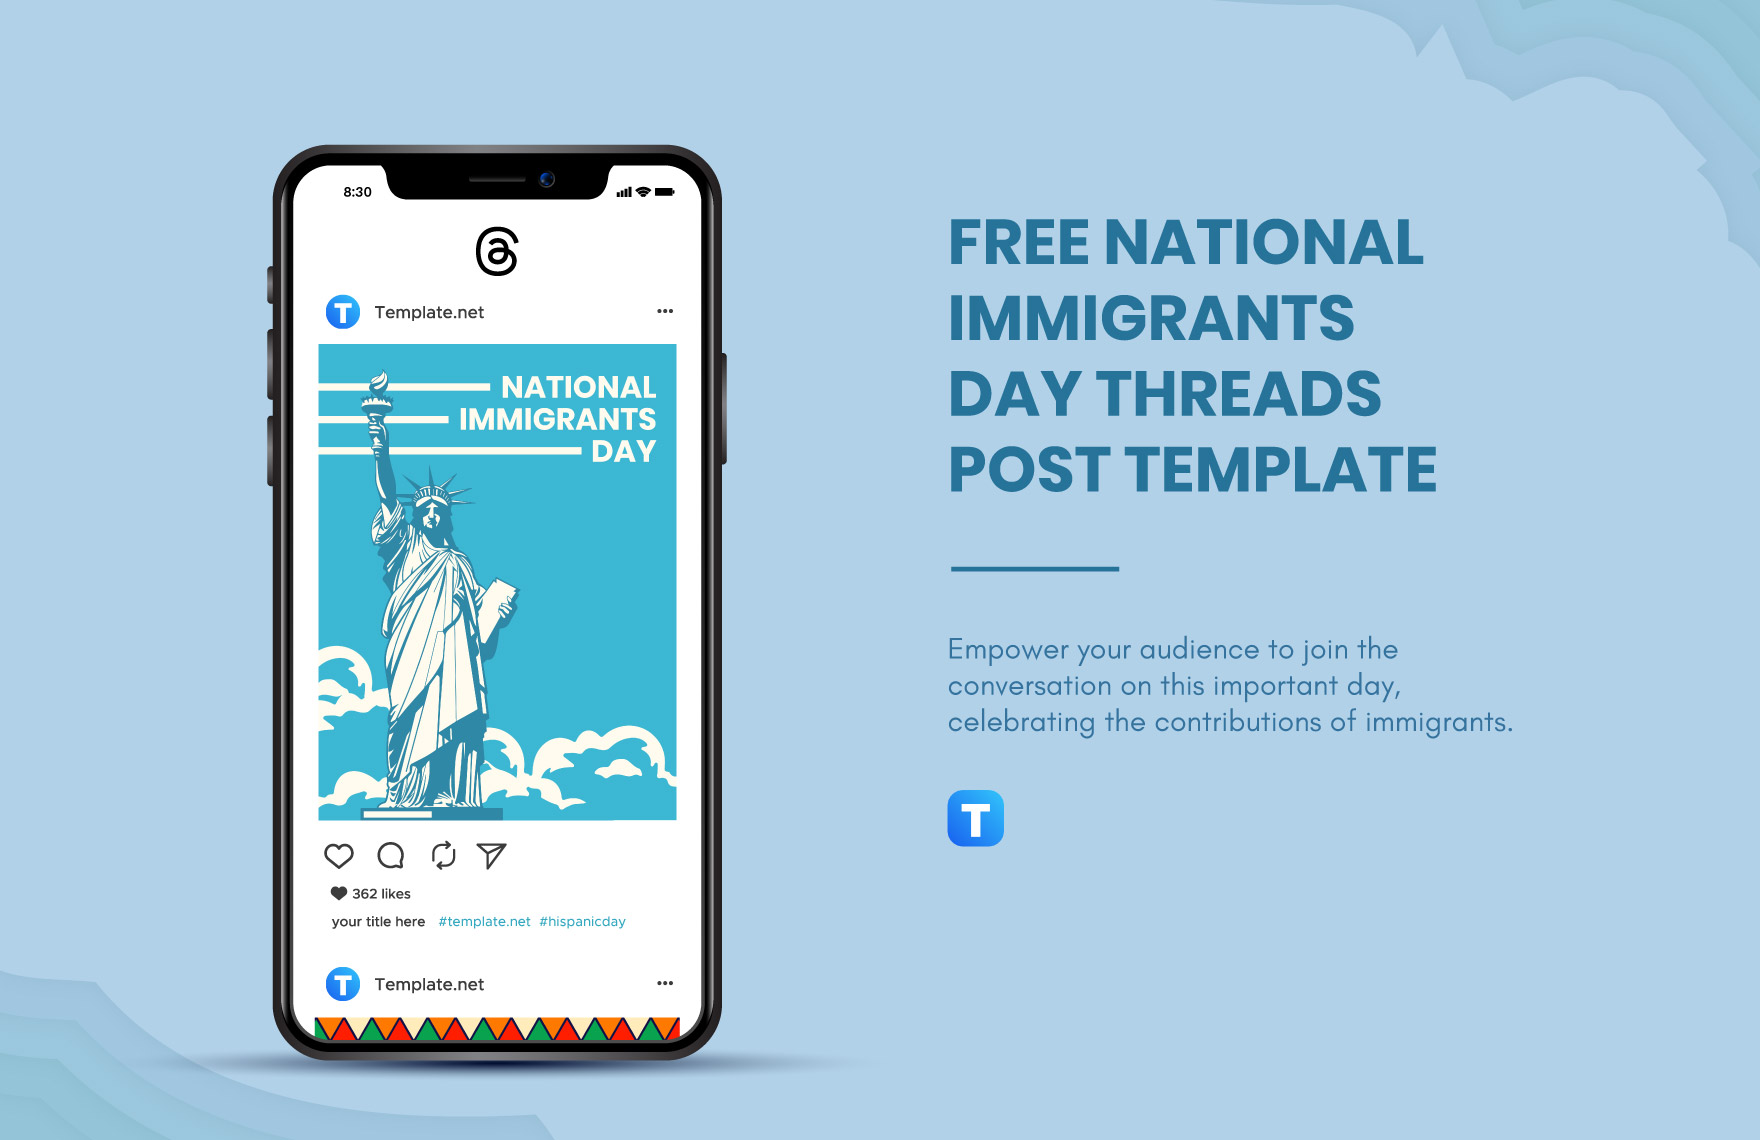 National Immigrants Day Threads Post Template